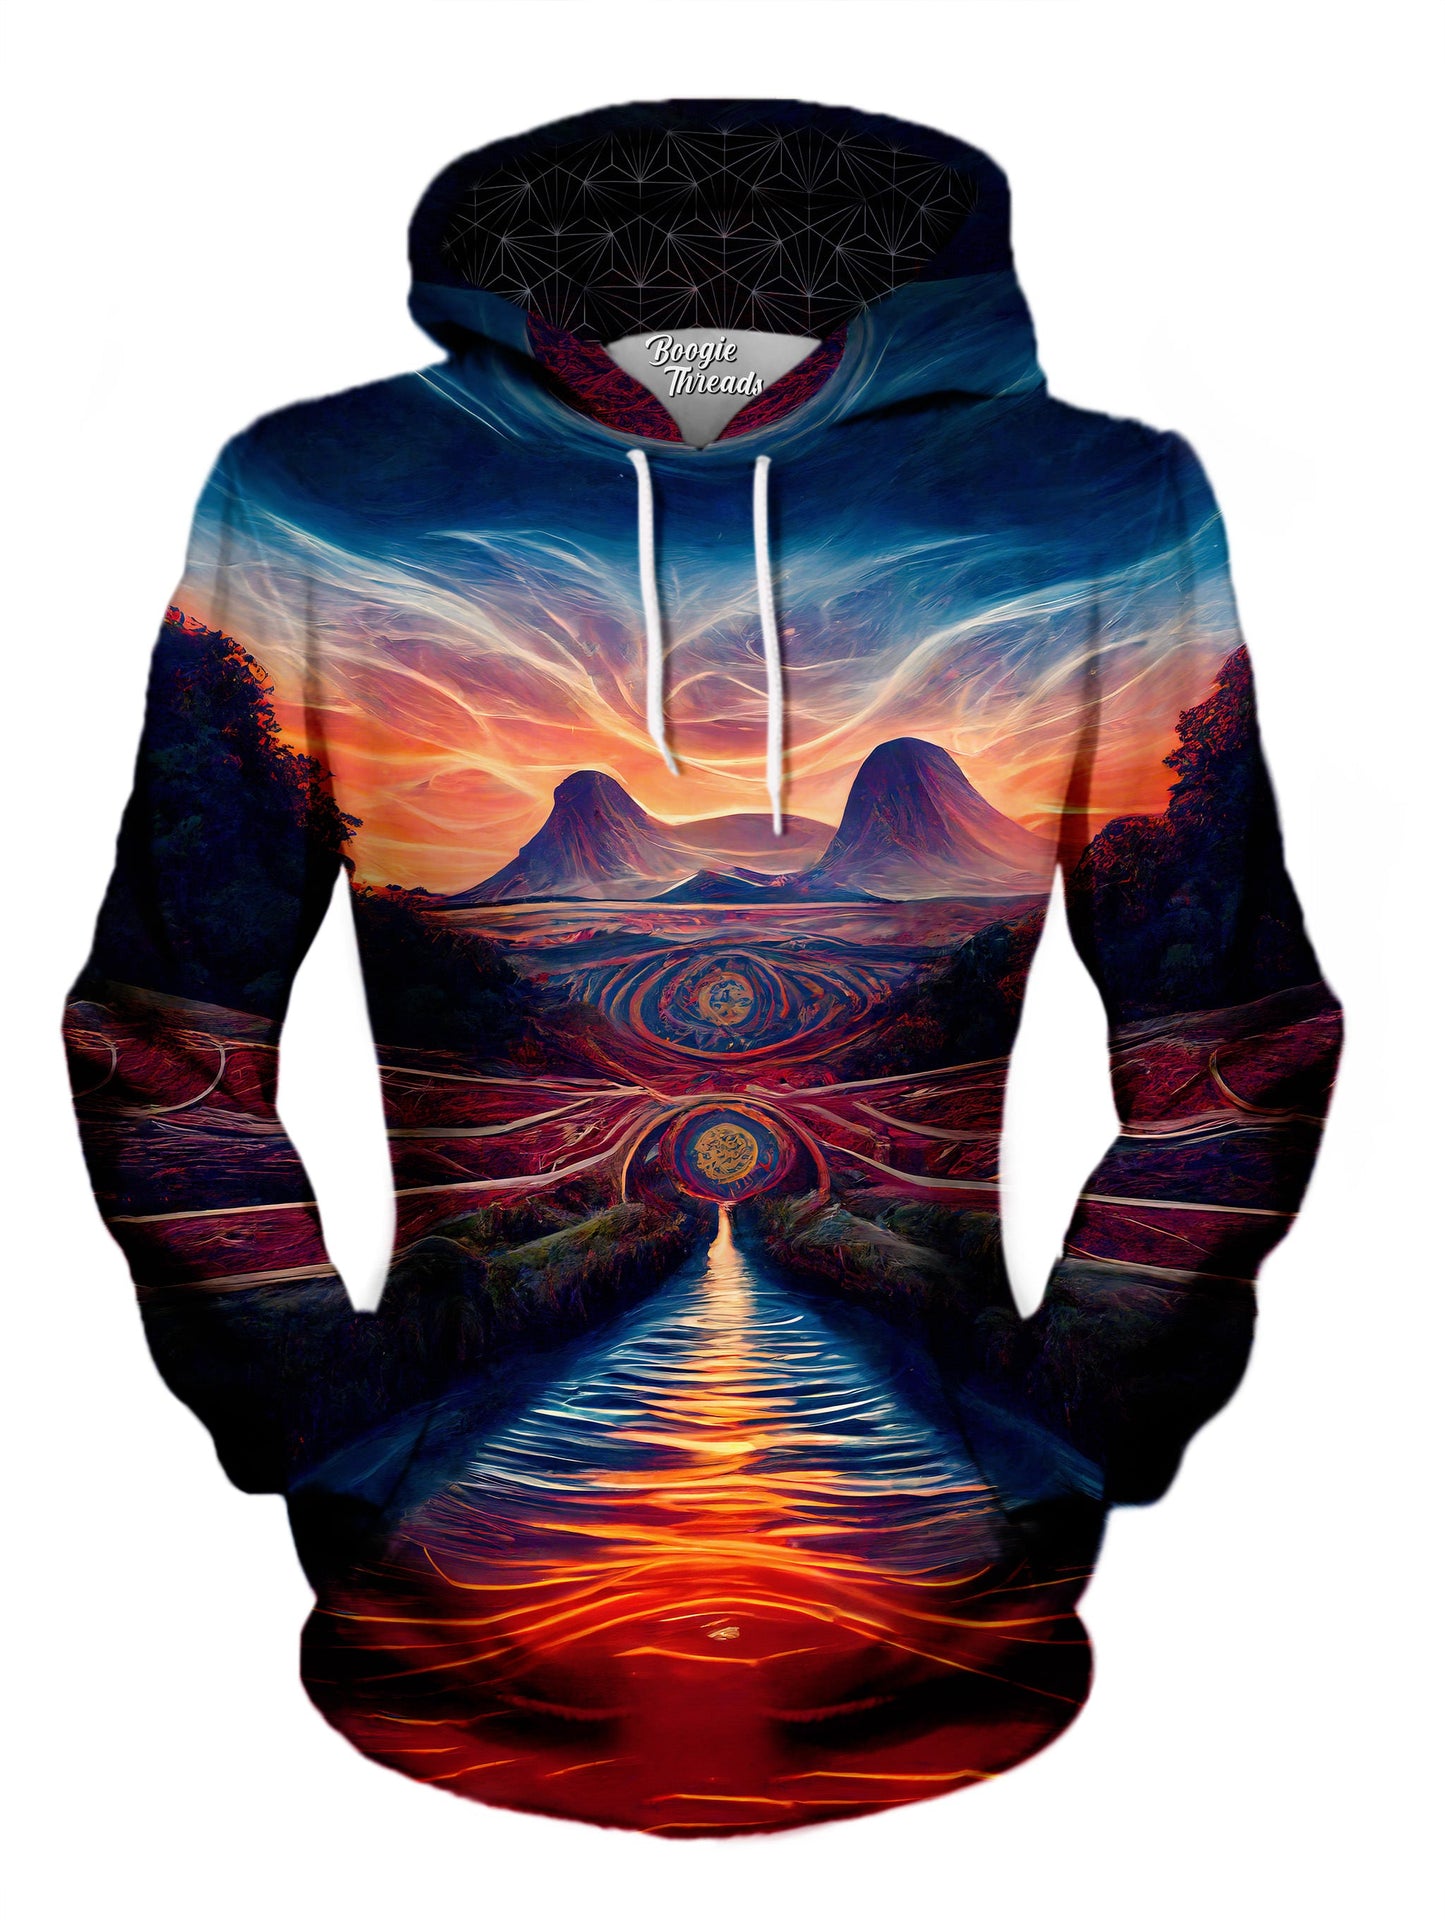 Rightful Obligation Unisex Pullover Hoodie - EDM Festival Clothing - Boogie Threads